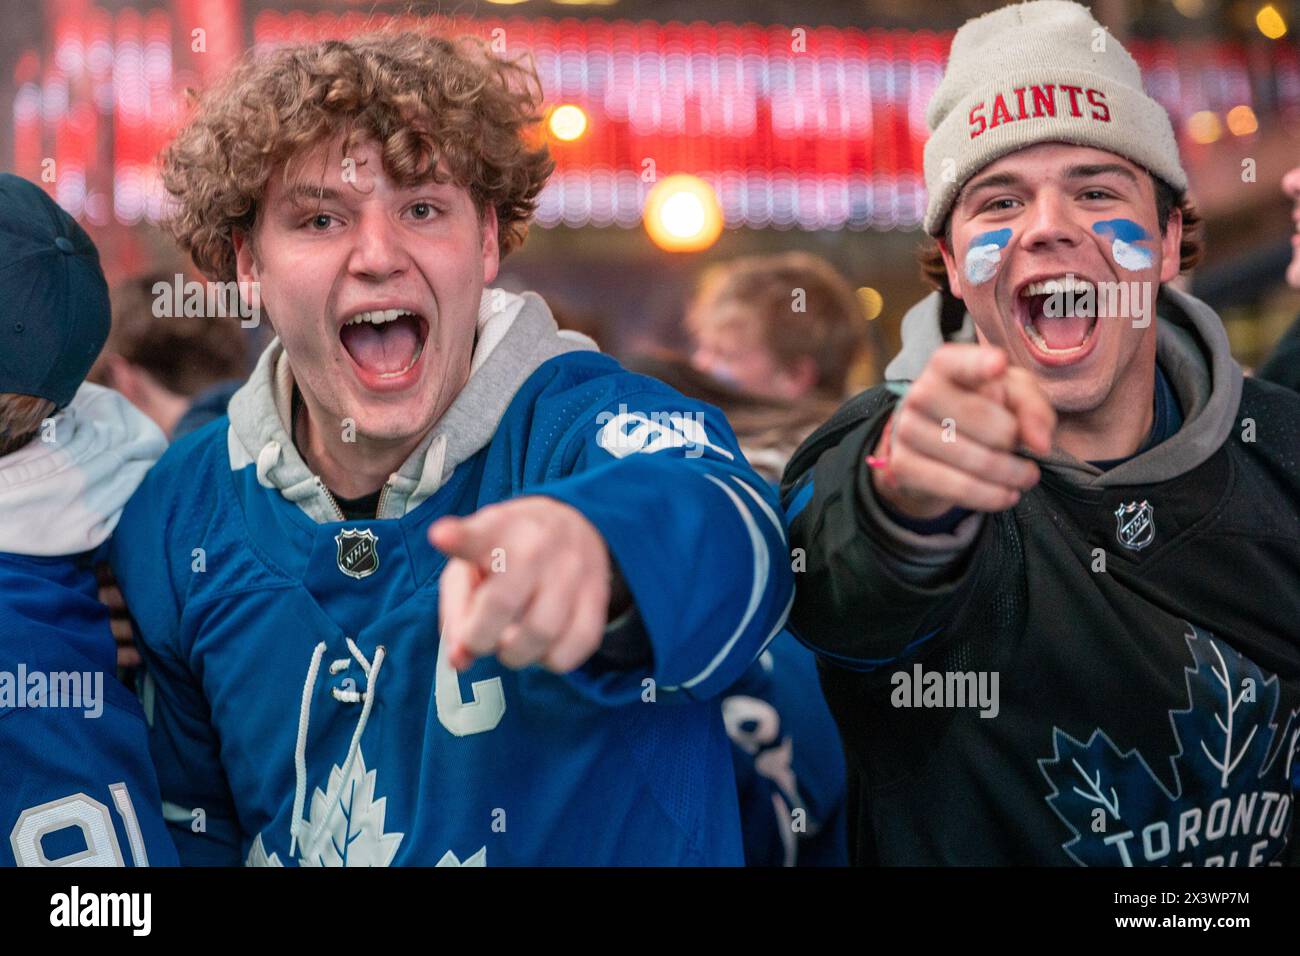 Fans watching the game on a giant screen react as the Toronto Maple Leafs score a goal against the Boston Bruins during Round 1, Game 4 at Maple Leaf Square outside Scotiabank Arena. During Toronto Maple Leafs playoff games, Maple Leaf Square transforms into a sea of blue and white, echoing with the chants of passionate fans eagerly rallying behind their team's quest for victory. The electric atmosphere radiates anticipation and excitement, creating unforgettable memories for both die-hard supporters and casual observers alike. Stock Photo